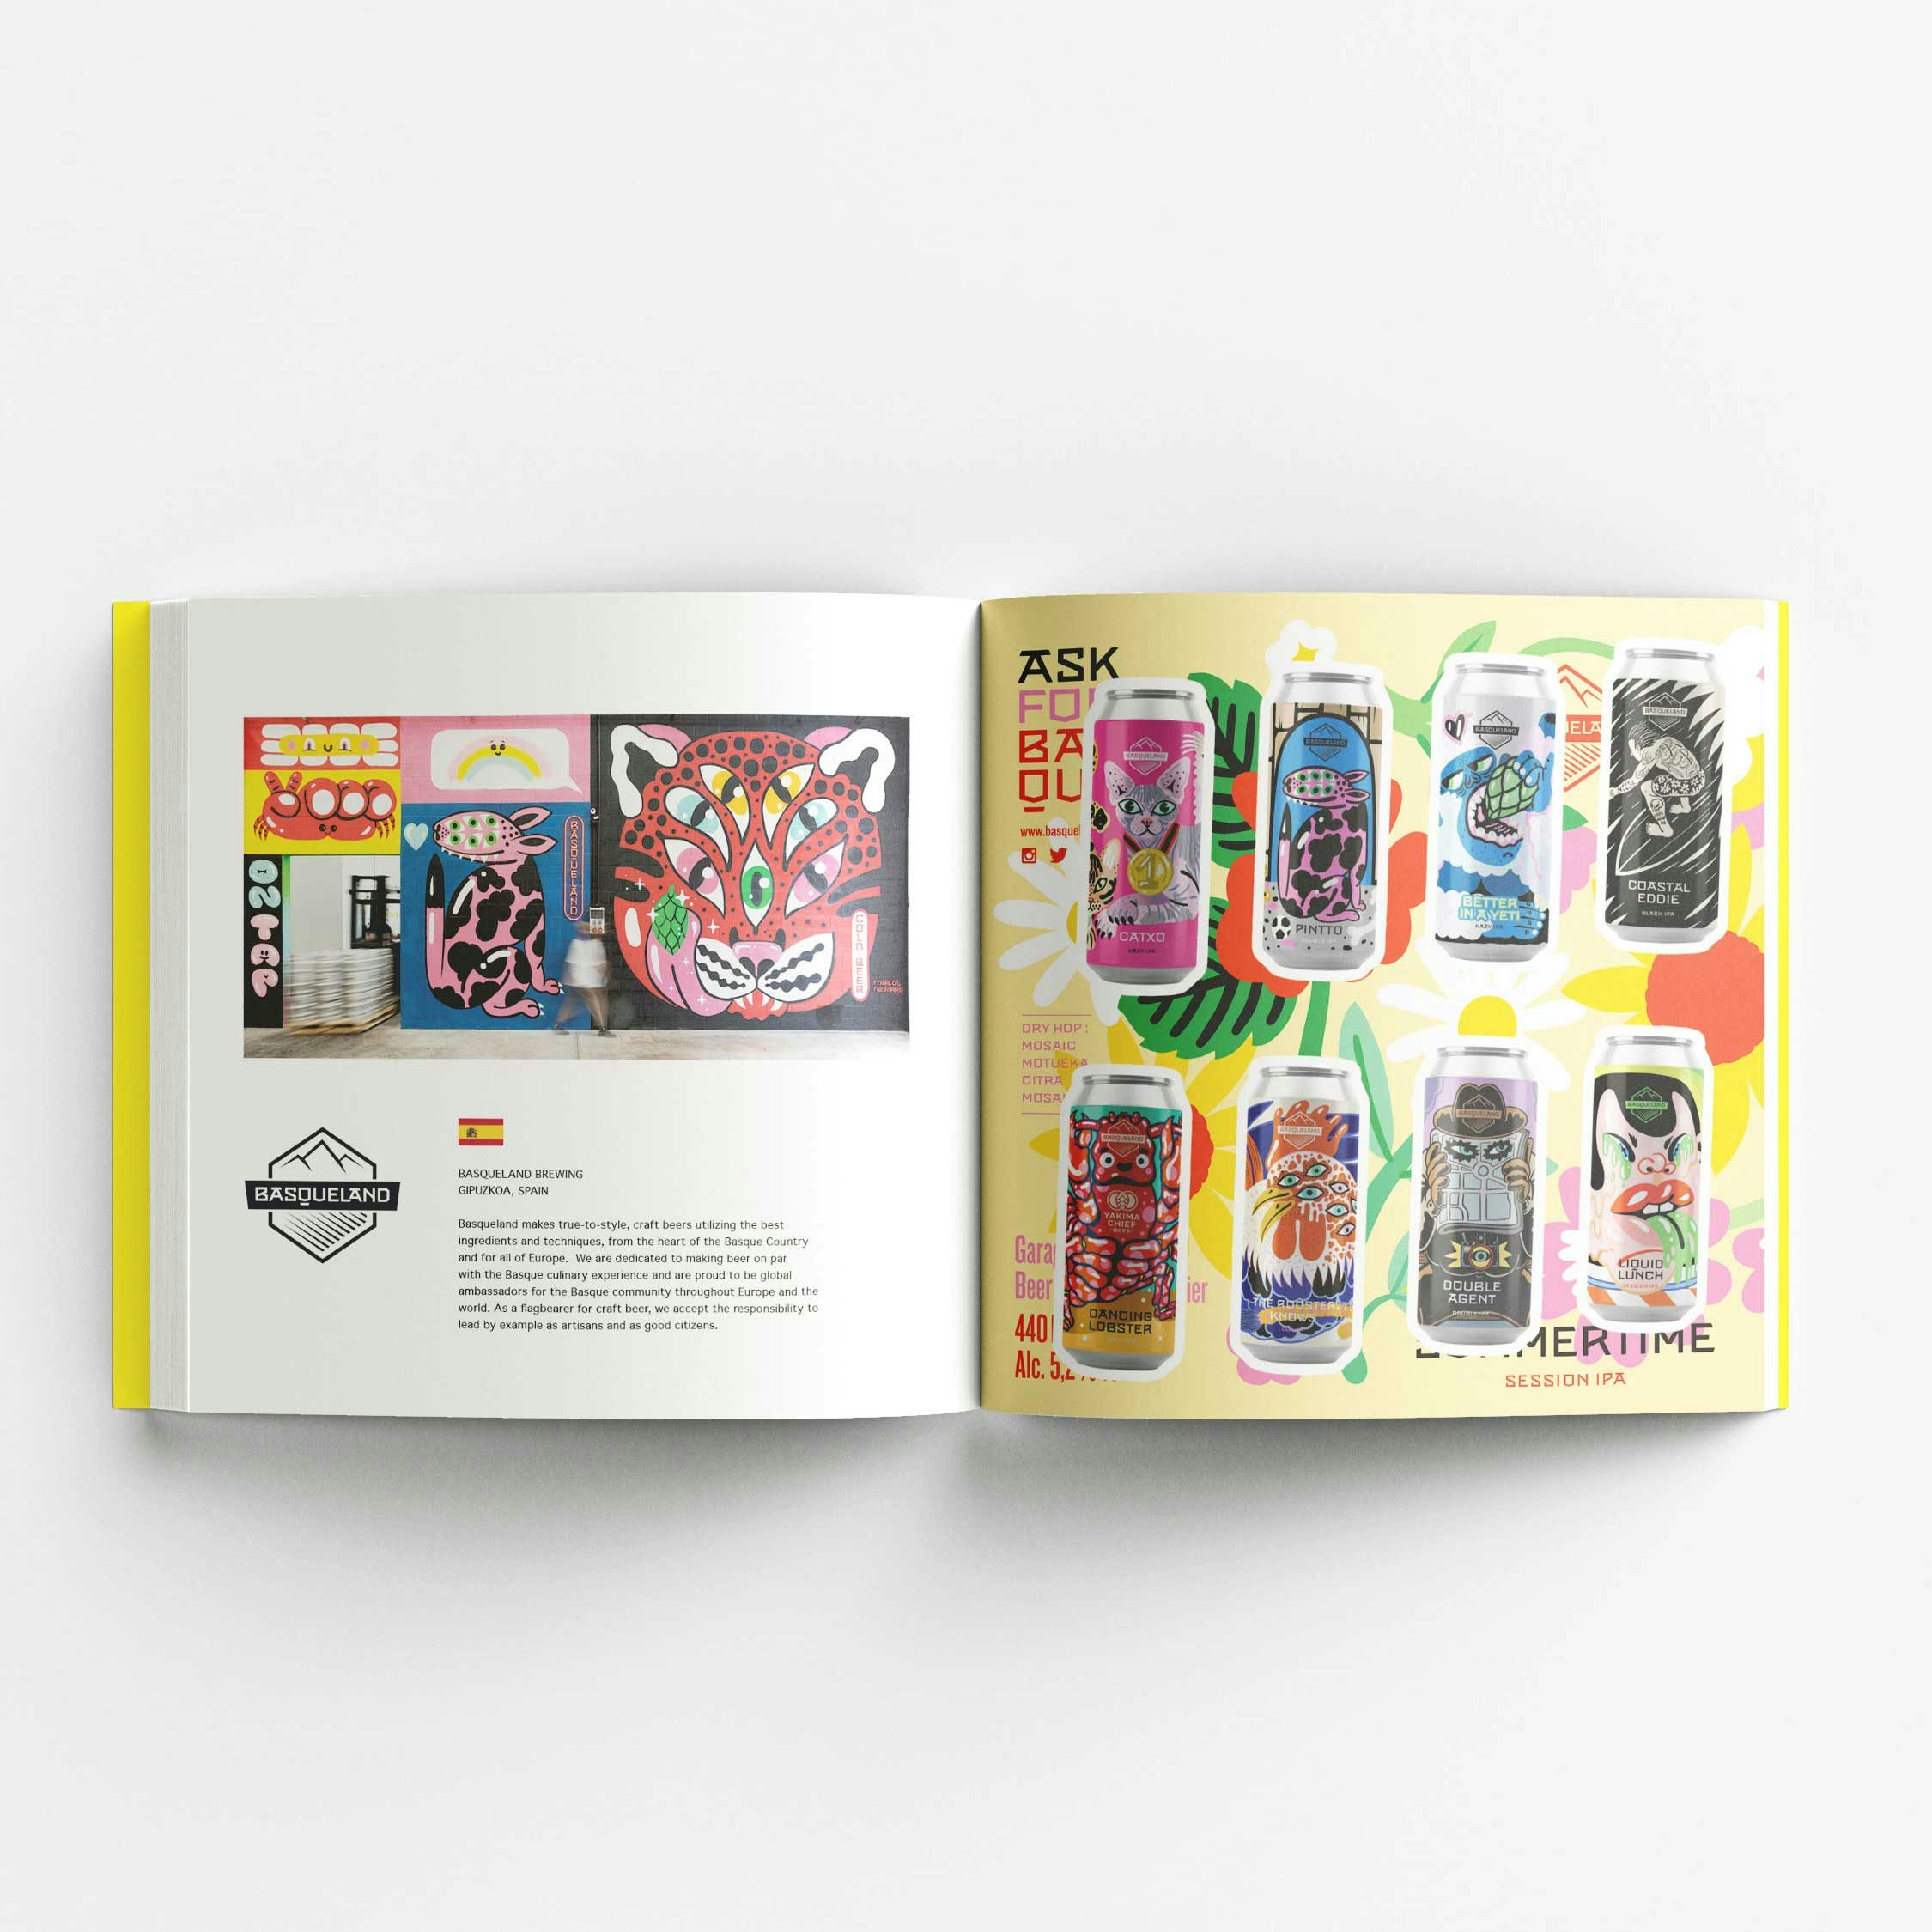 https://creativereview.imgix.net/content/uploads/2023/06/The-Craft-Beer-Sticker-Books-Spread1.jpg?auto=compress,format&q=60&w=2250&h=2250